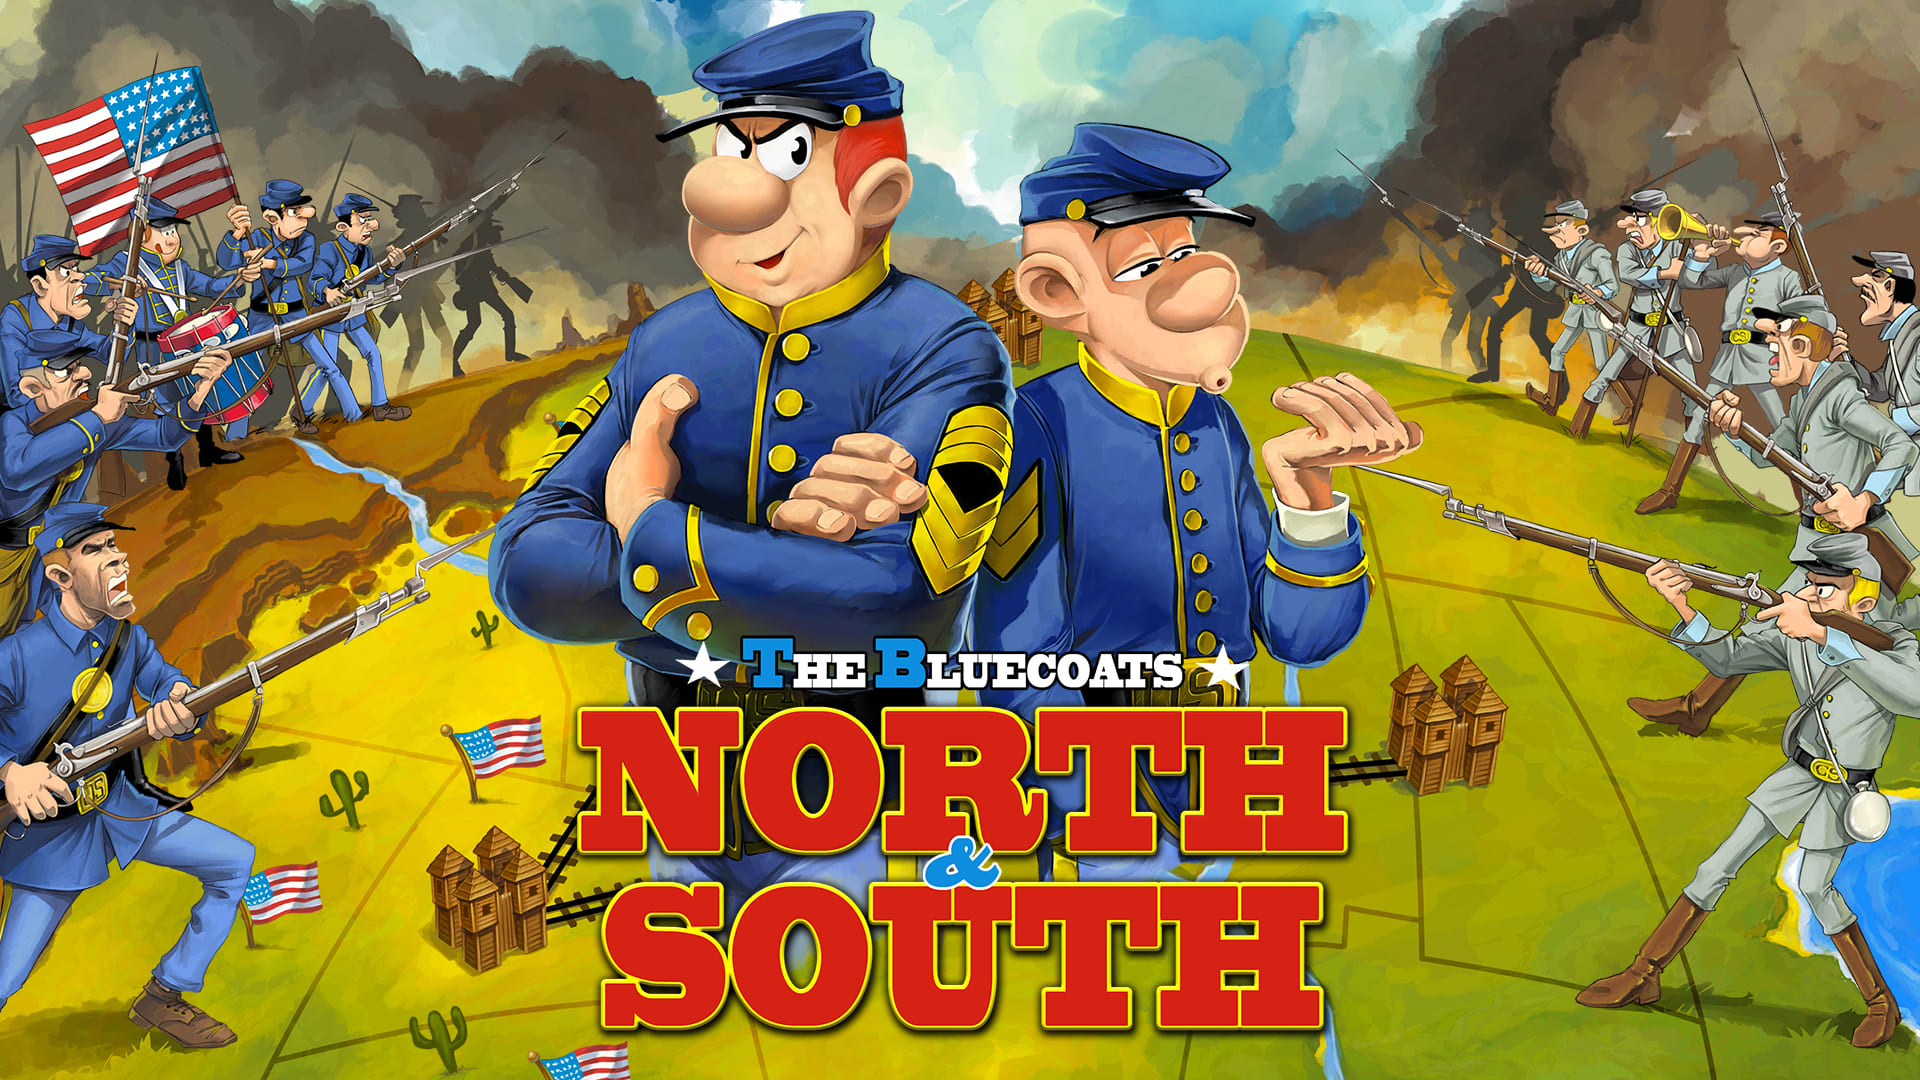 The Bluecoats North & South